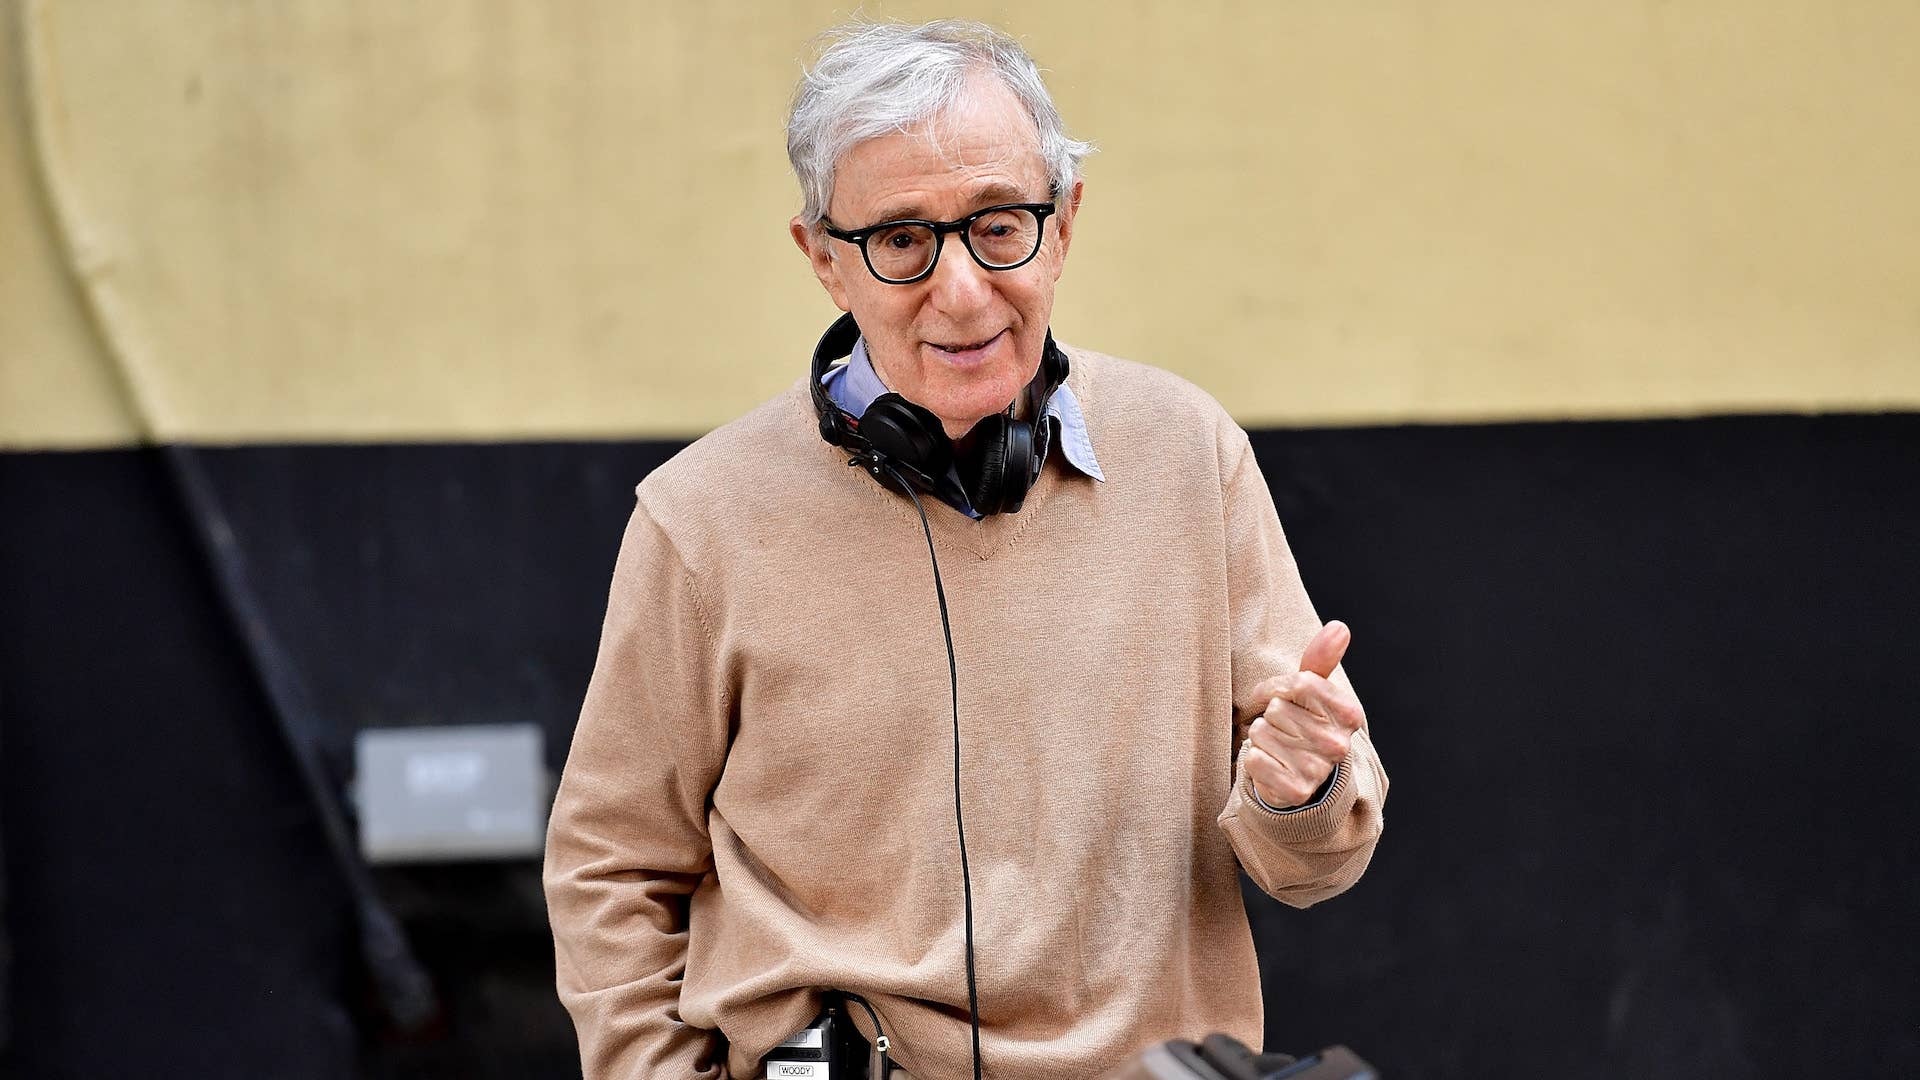 Woody Allen photographed in NYC